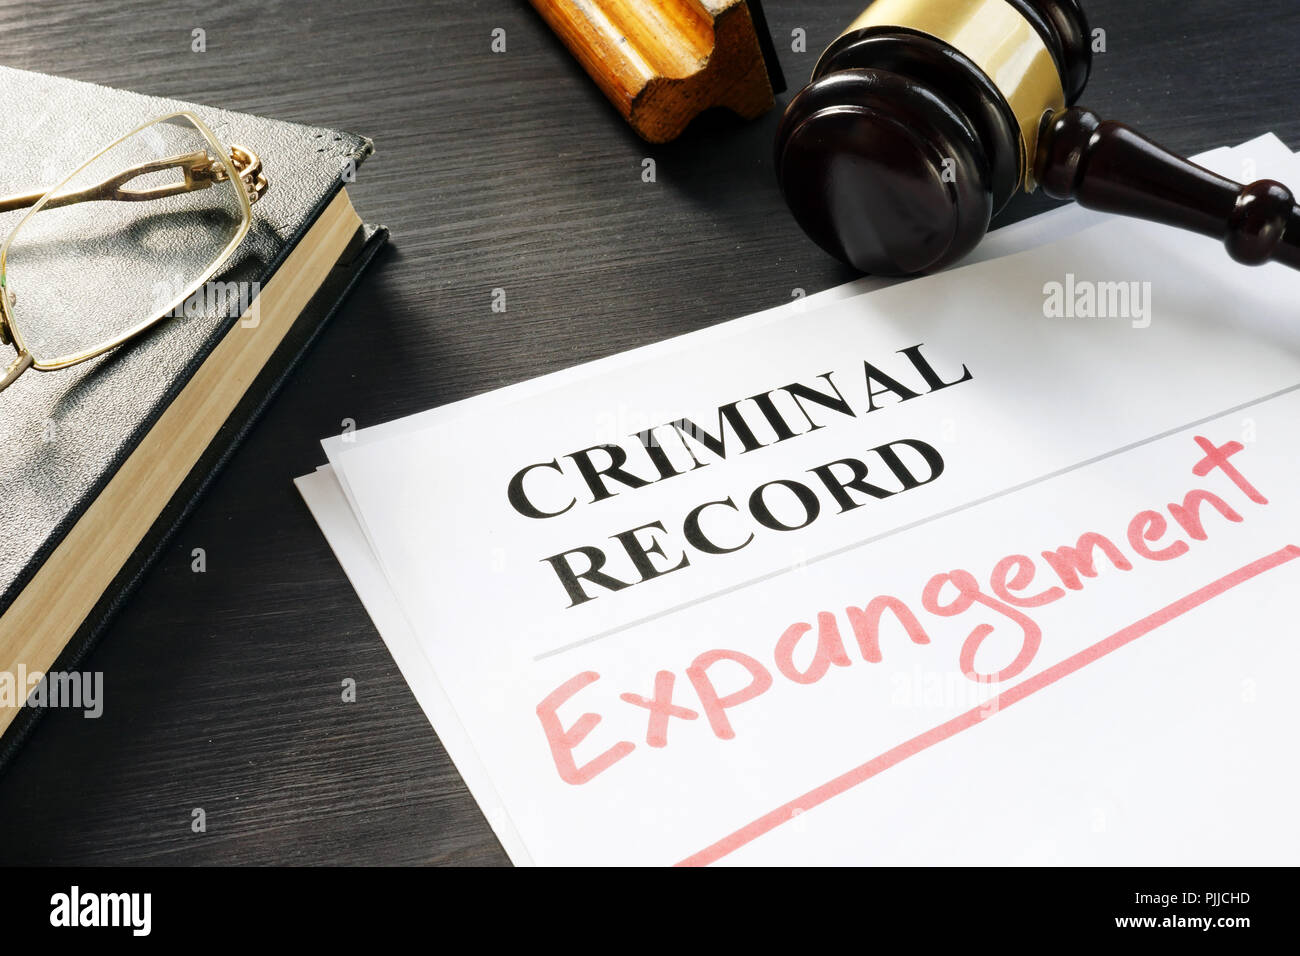 Expunge of criminal record. Expungement written on a document. Stock Photo